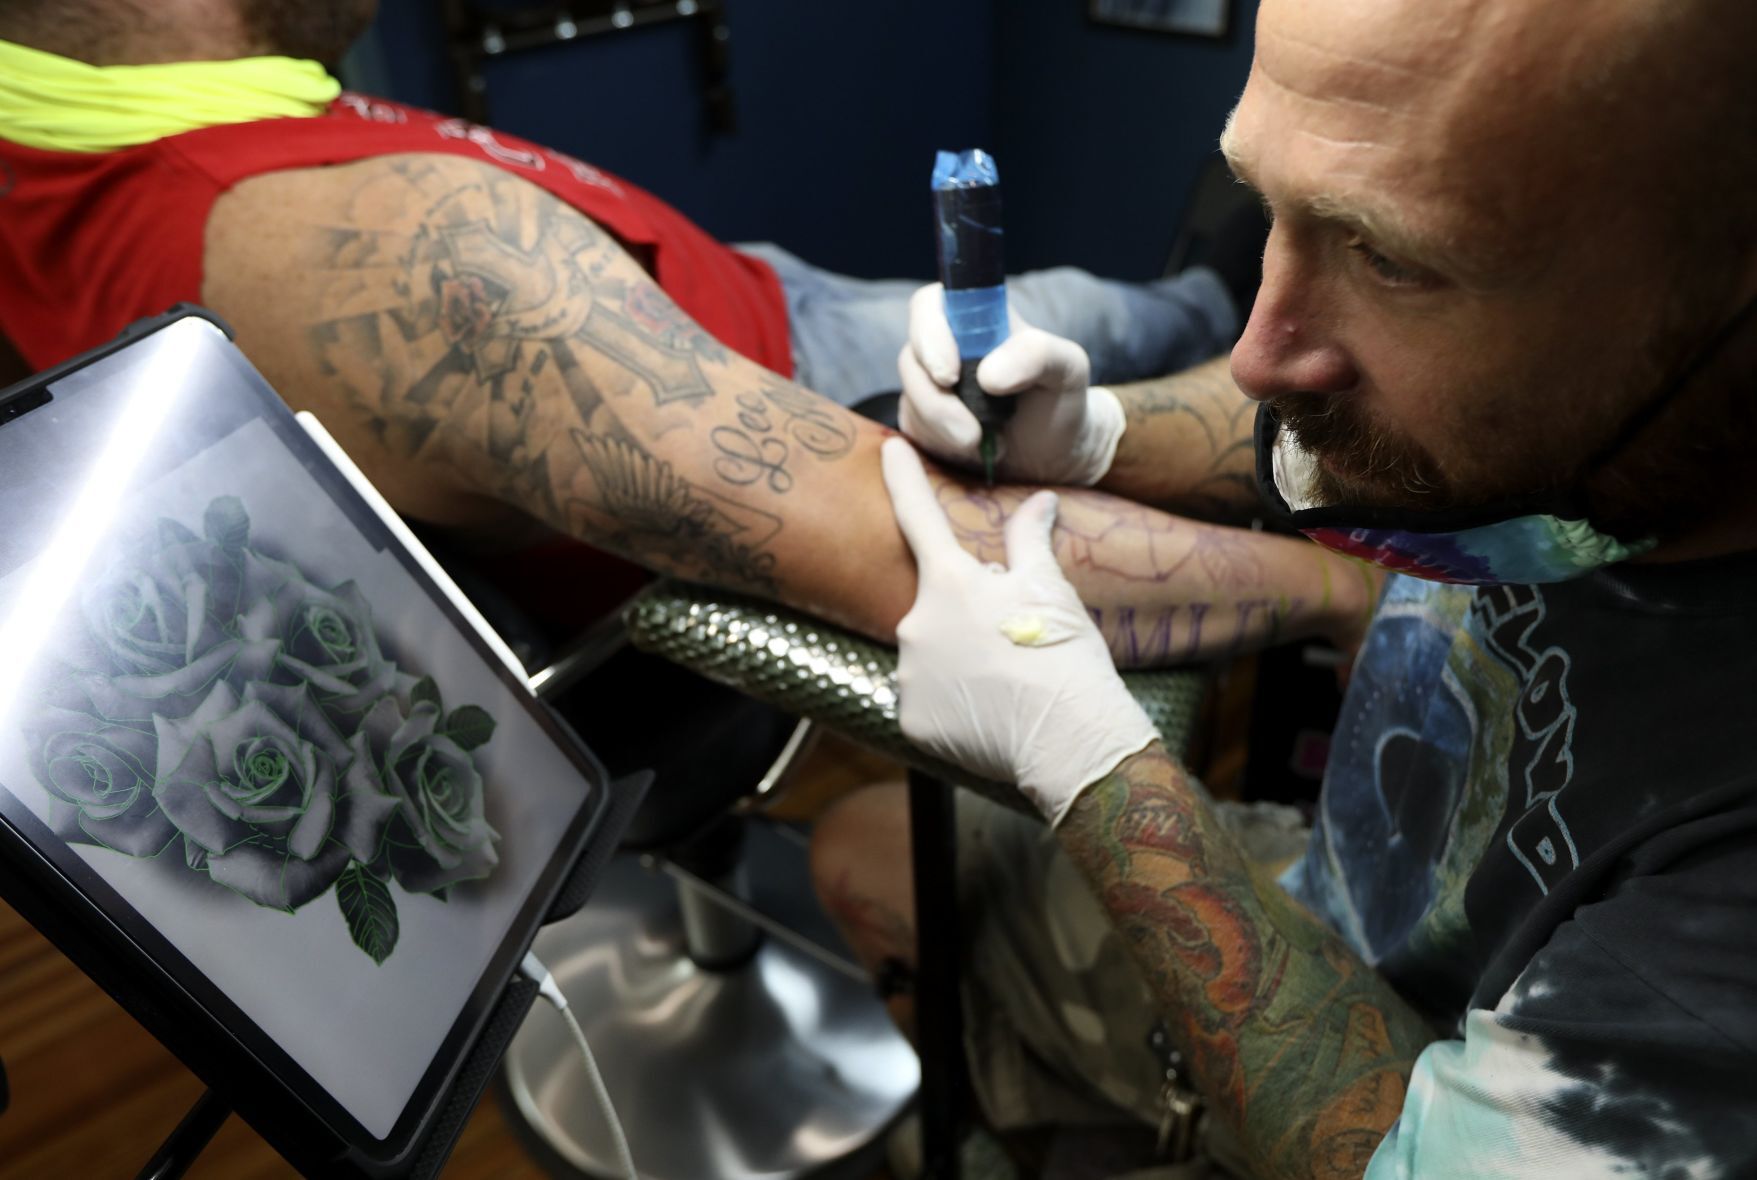 Old Town tattoo artist to compete for 100K on Ink Master